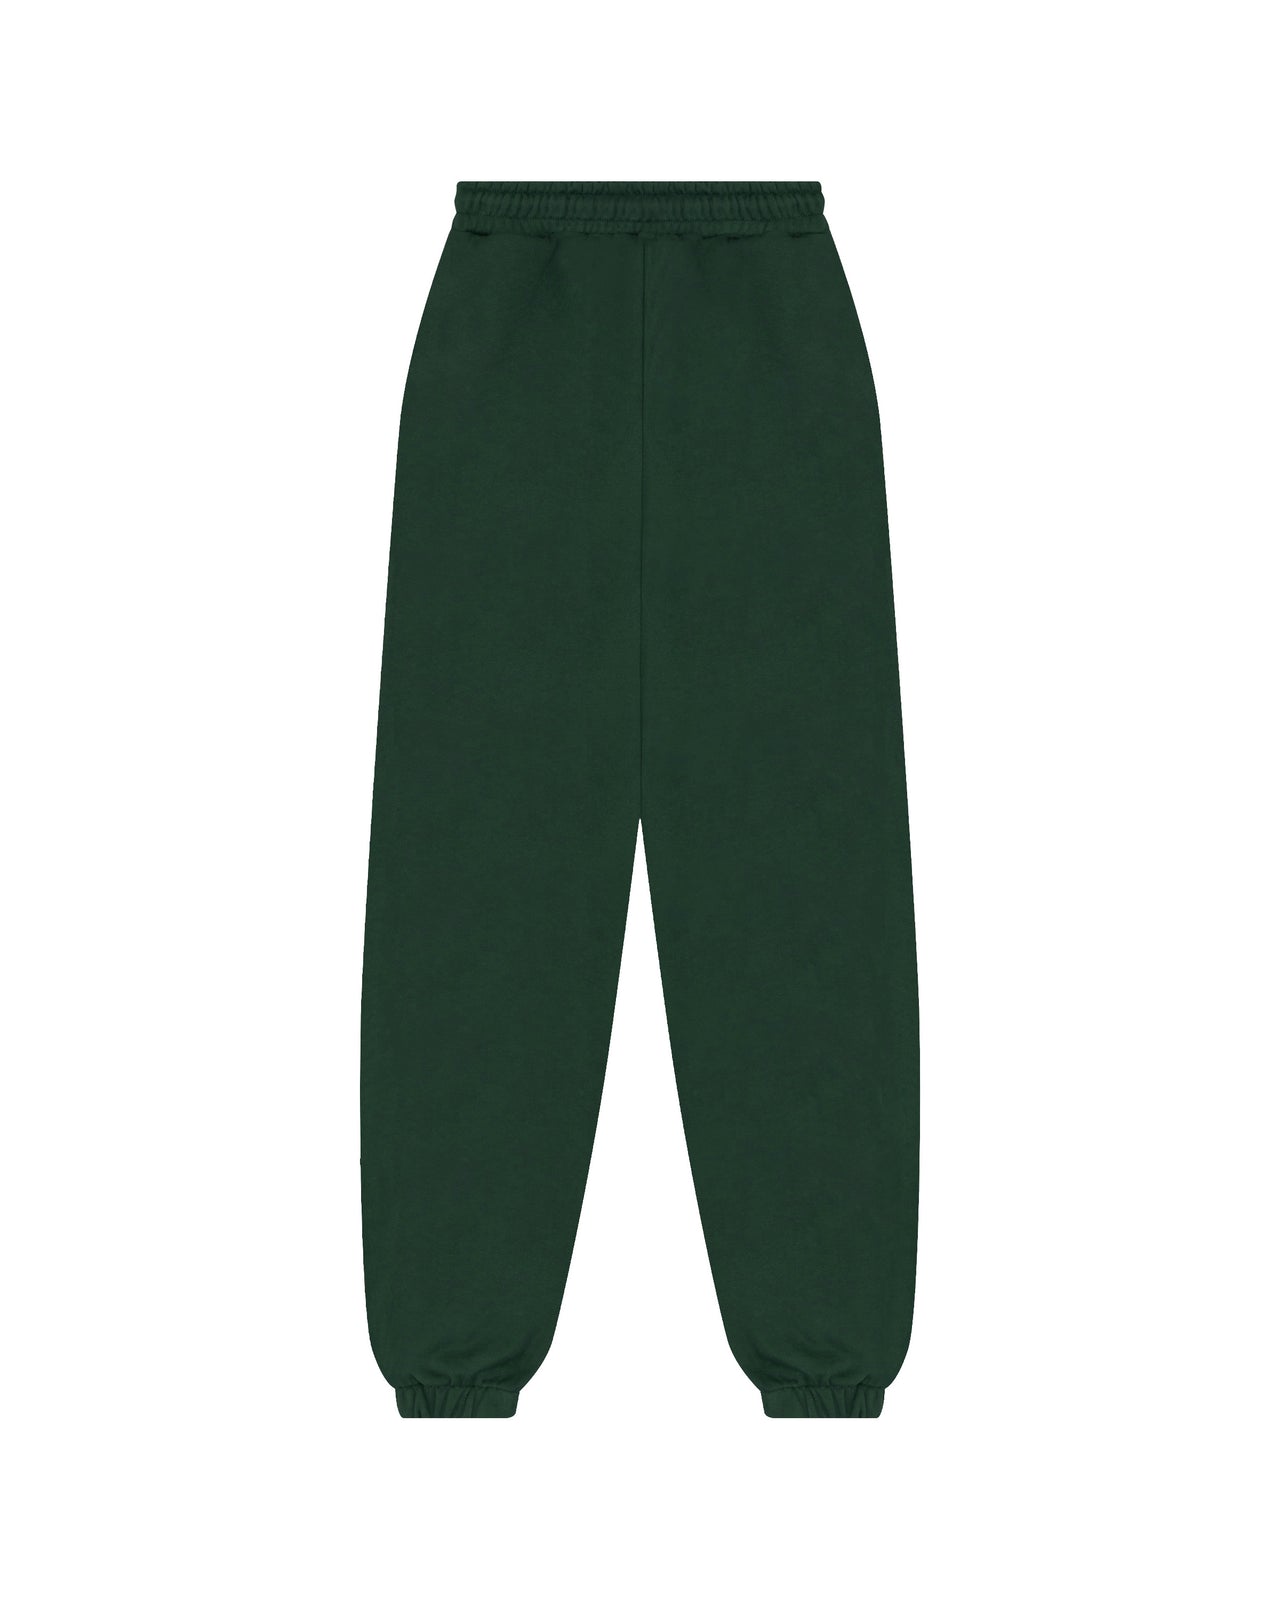 Sweatpants - forest green